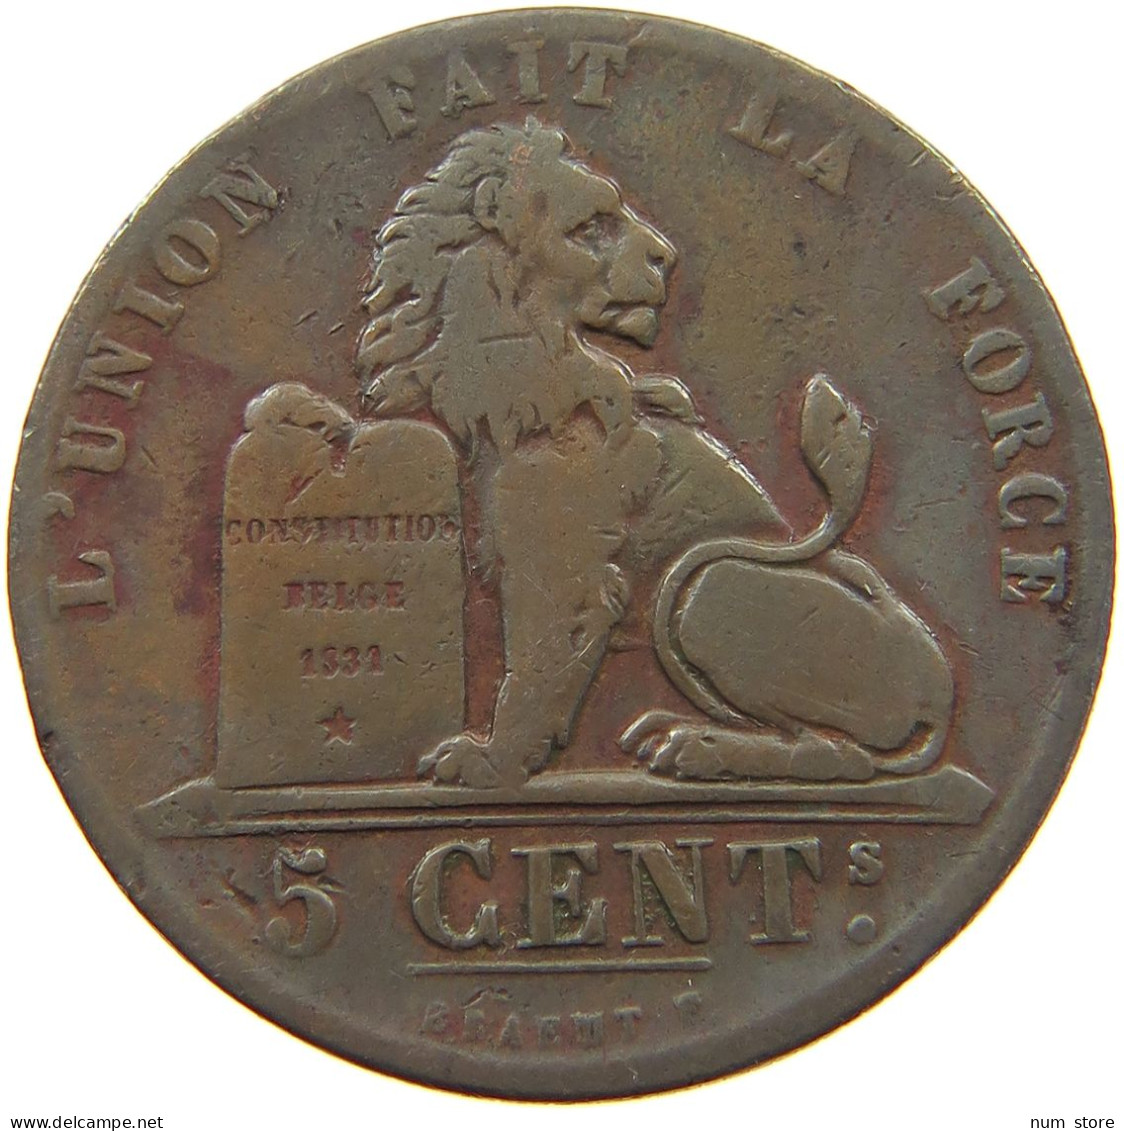 BELGIUM 5 CENTIMES 1851 BELGIUM 5 CENTIMES 1851 LARGE 5 WITH POINT #t132 0577 - 5 Cents